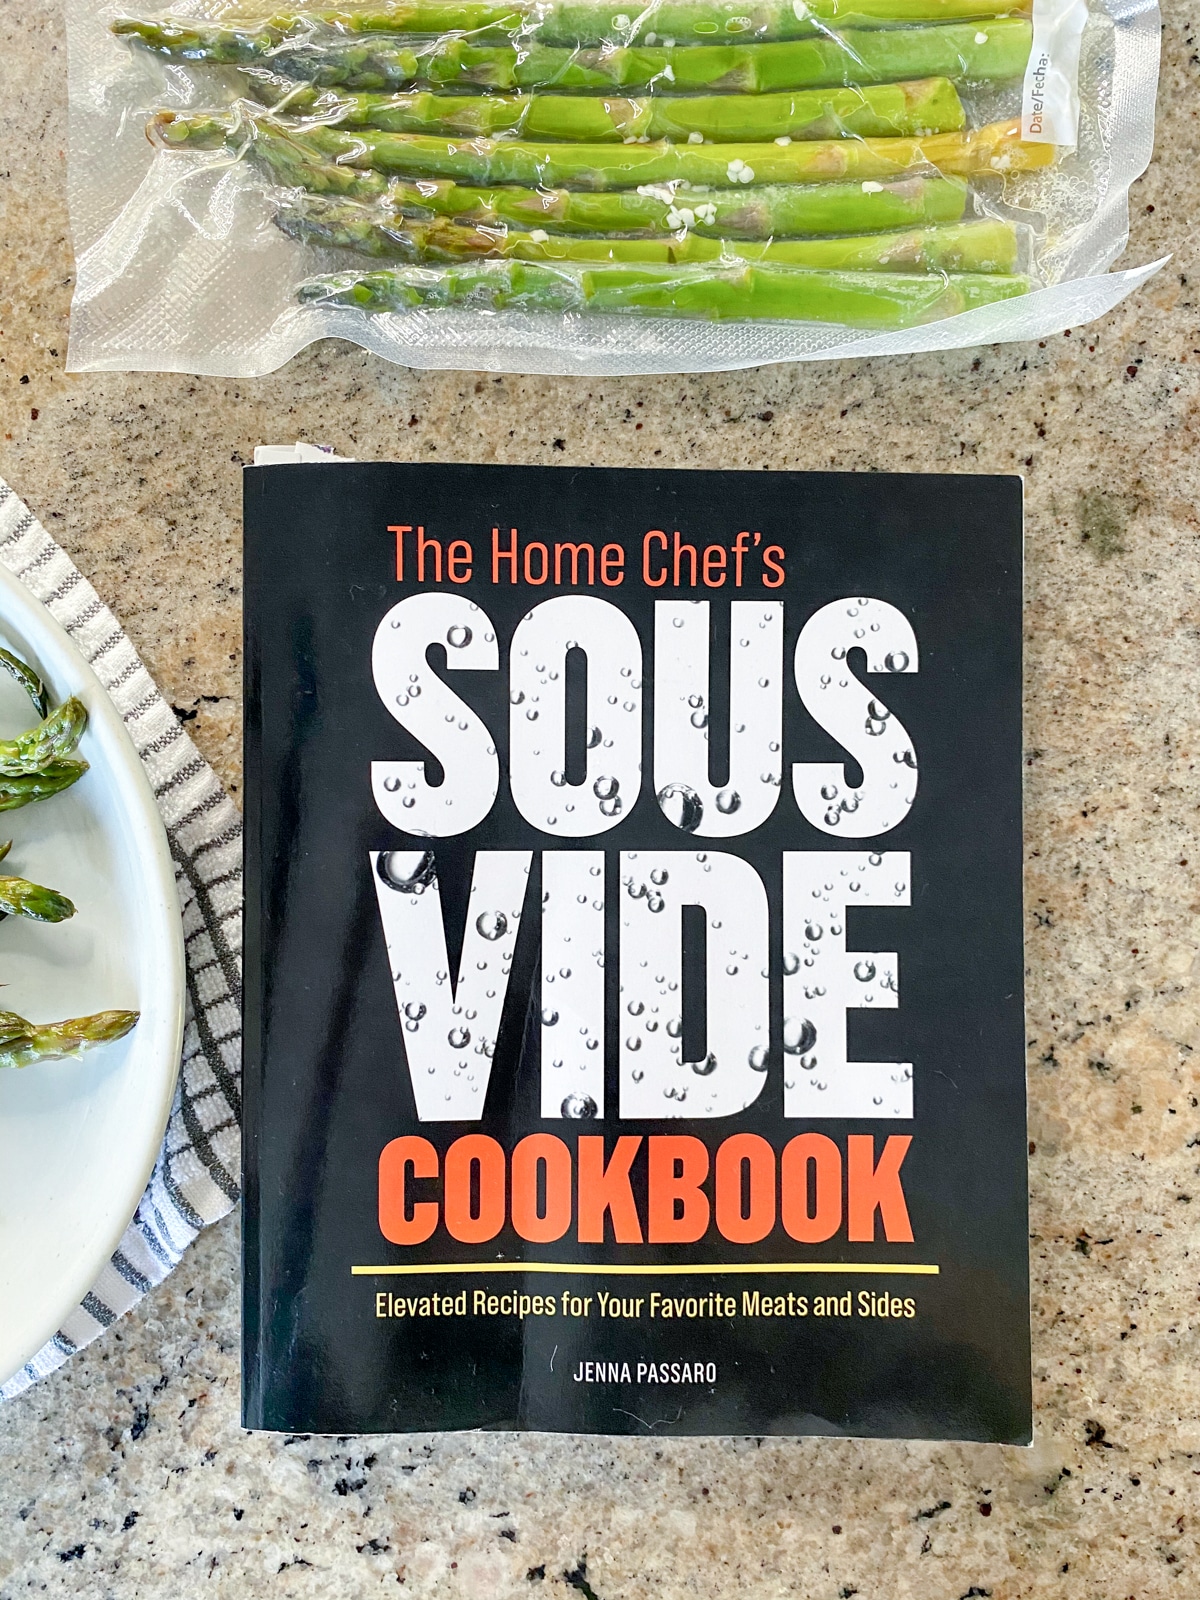 The home chef's sous vide cookbook and asparagus